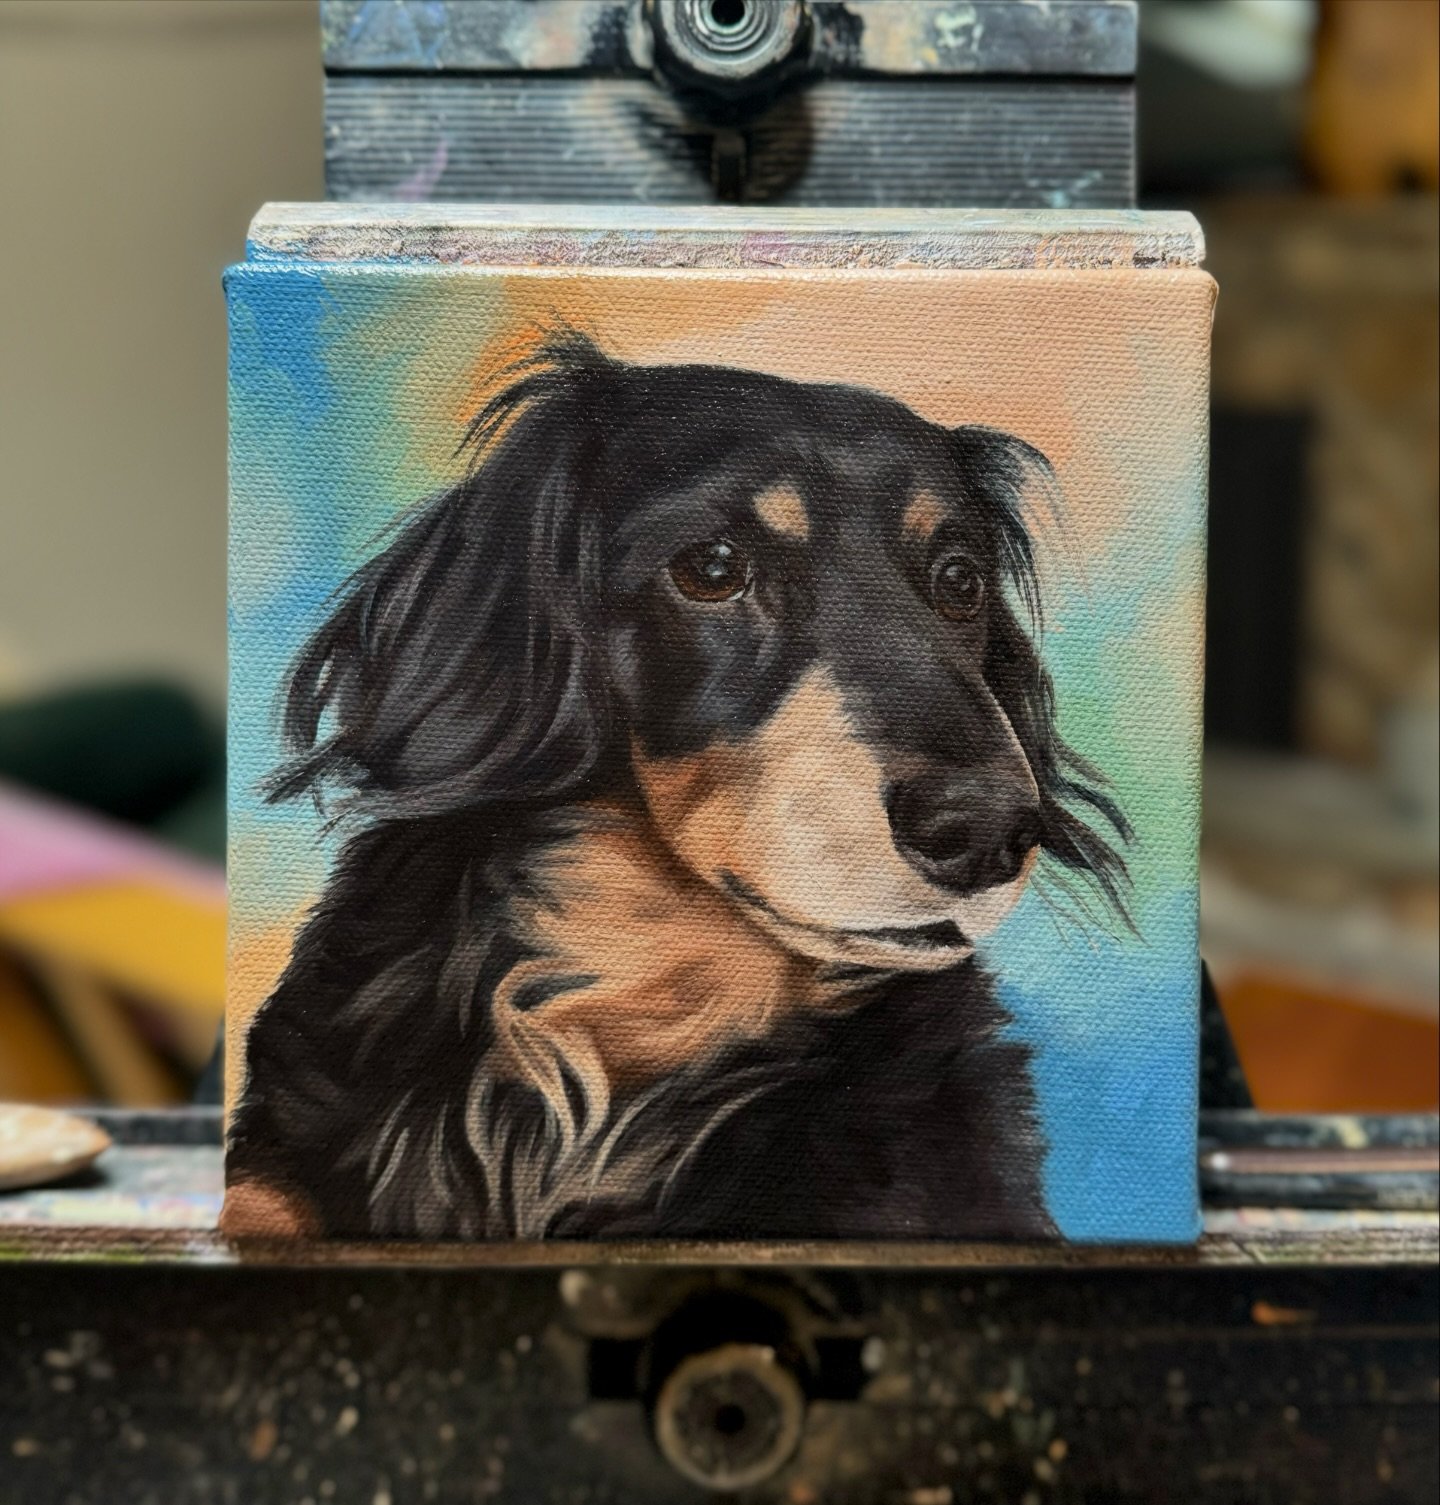 I worked on my painting of Dan the Dachshund today! He is a bit over halfway completed&mdash; I&rsquo;ll be adding the final details and figuring out the background more next week. His portrait was commissioned as a surprise gift from a daughter to h